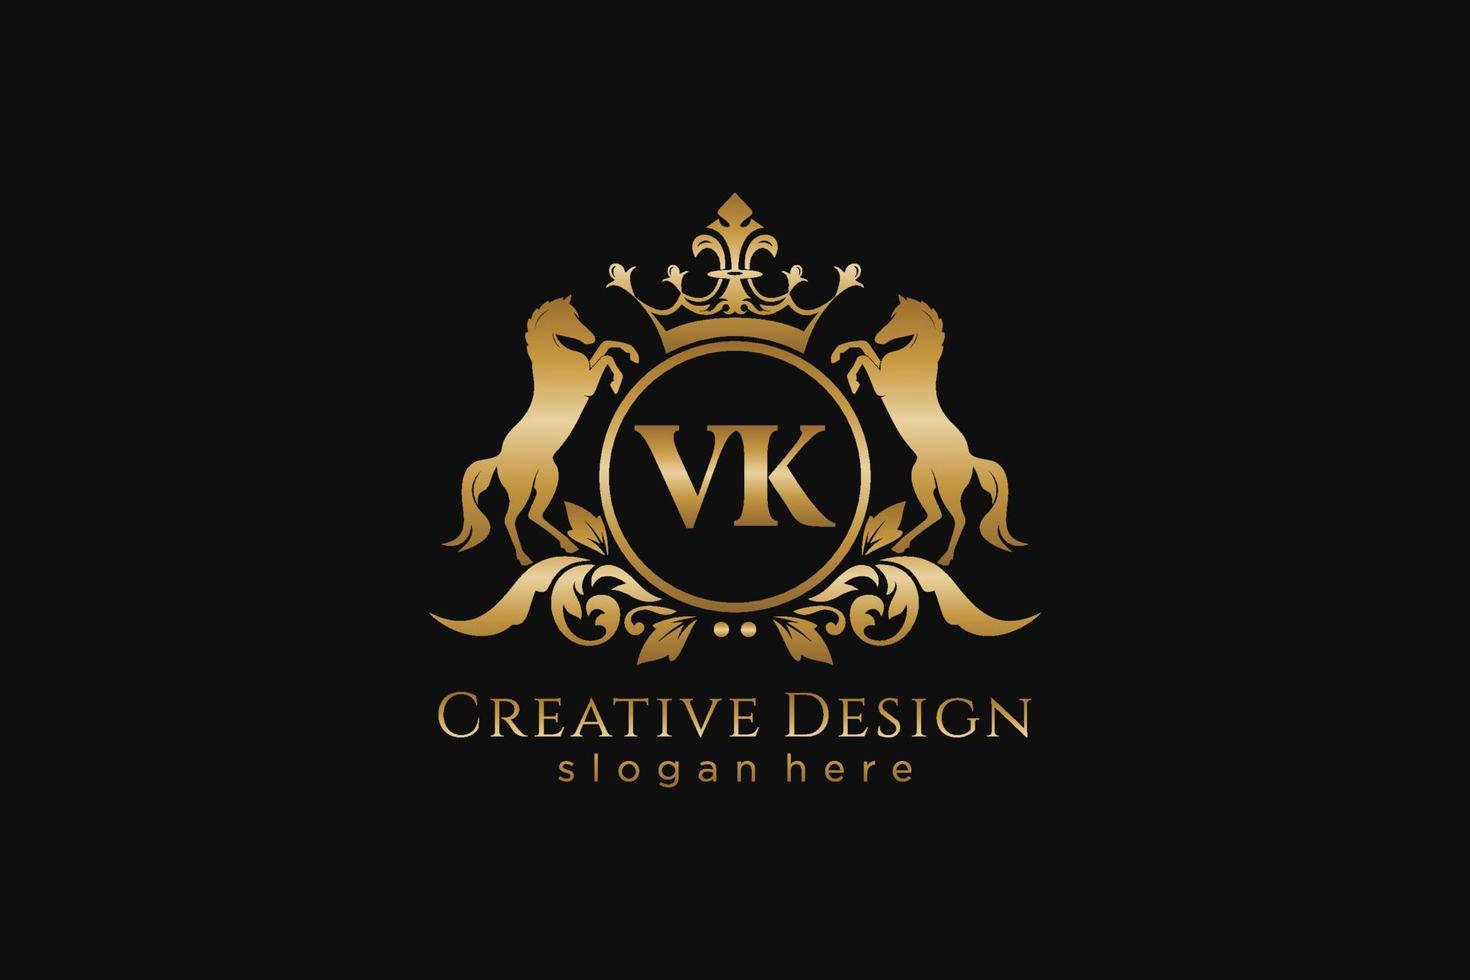 initial VK Retro golden crest with circle and two horses, badge template with scrolls and royal crown - perfect for luxurious branding projects vector